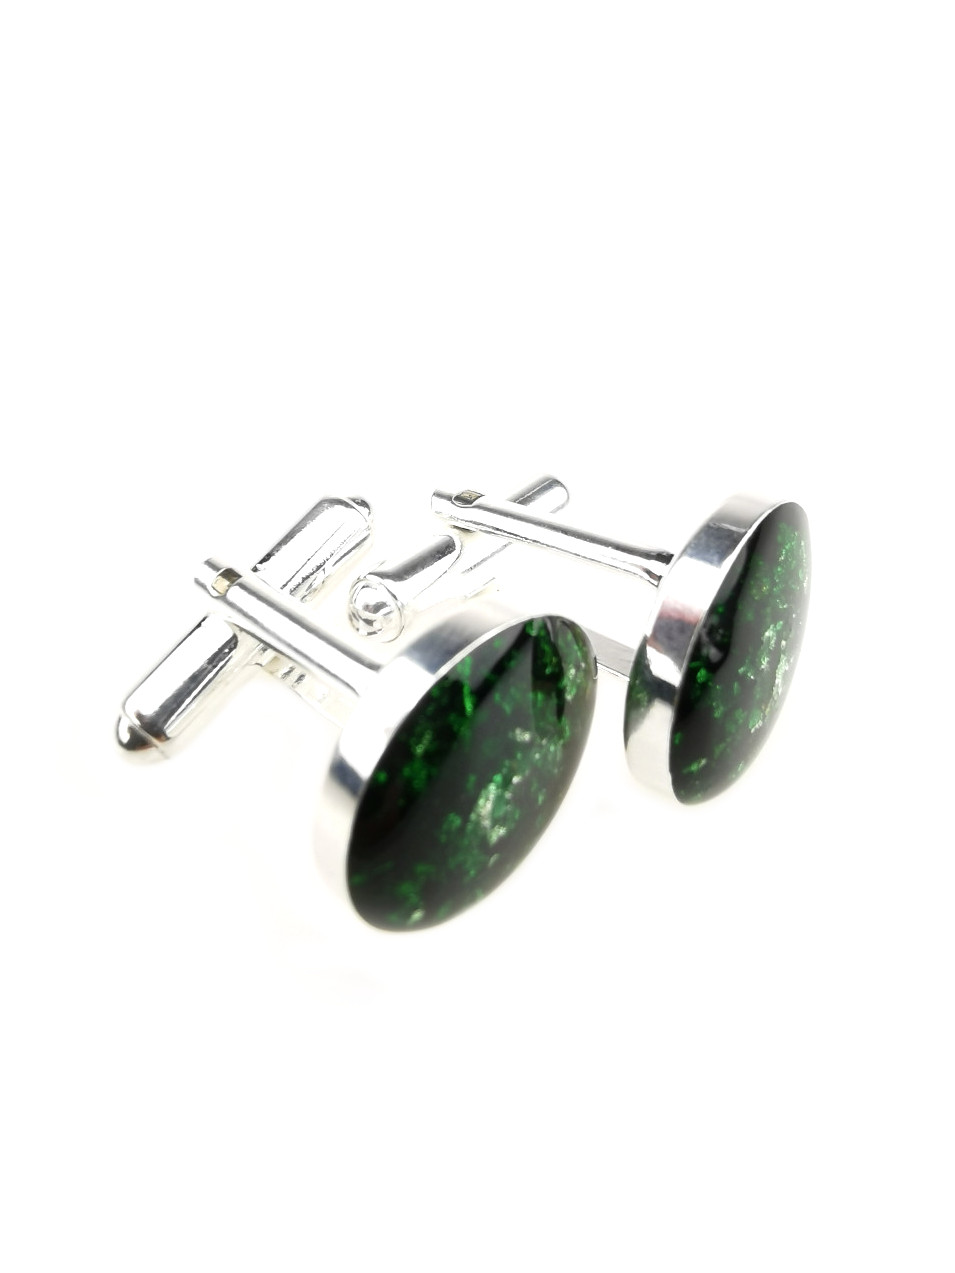 Green Orgone Cufflinks with Gold and Silver by OrgoneVibes